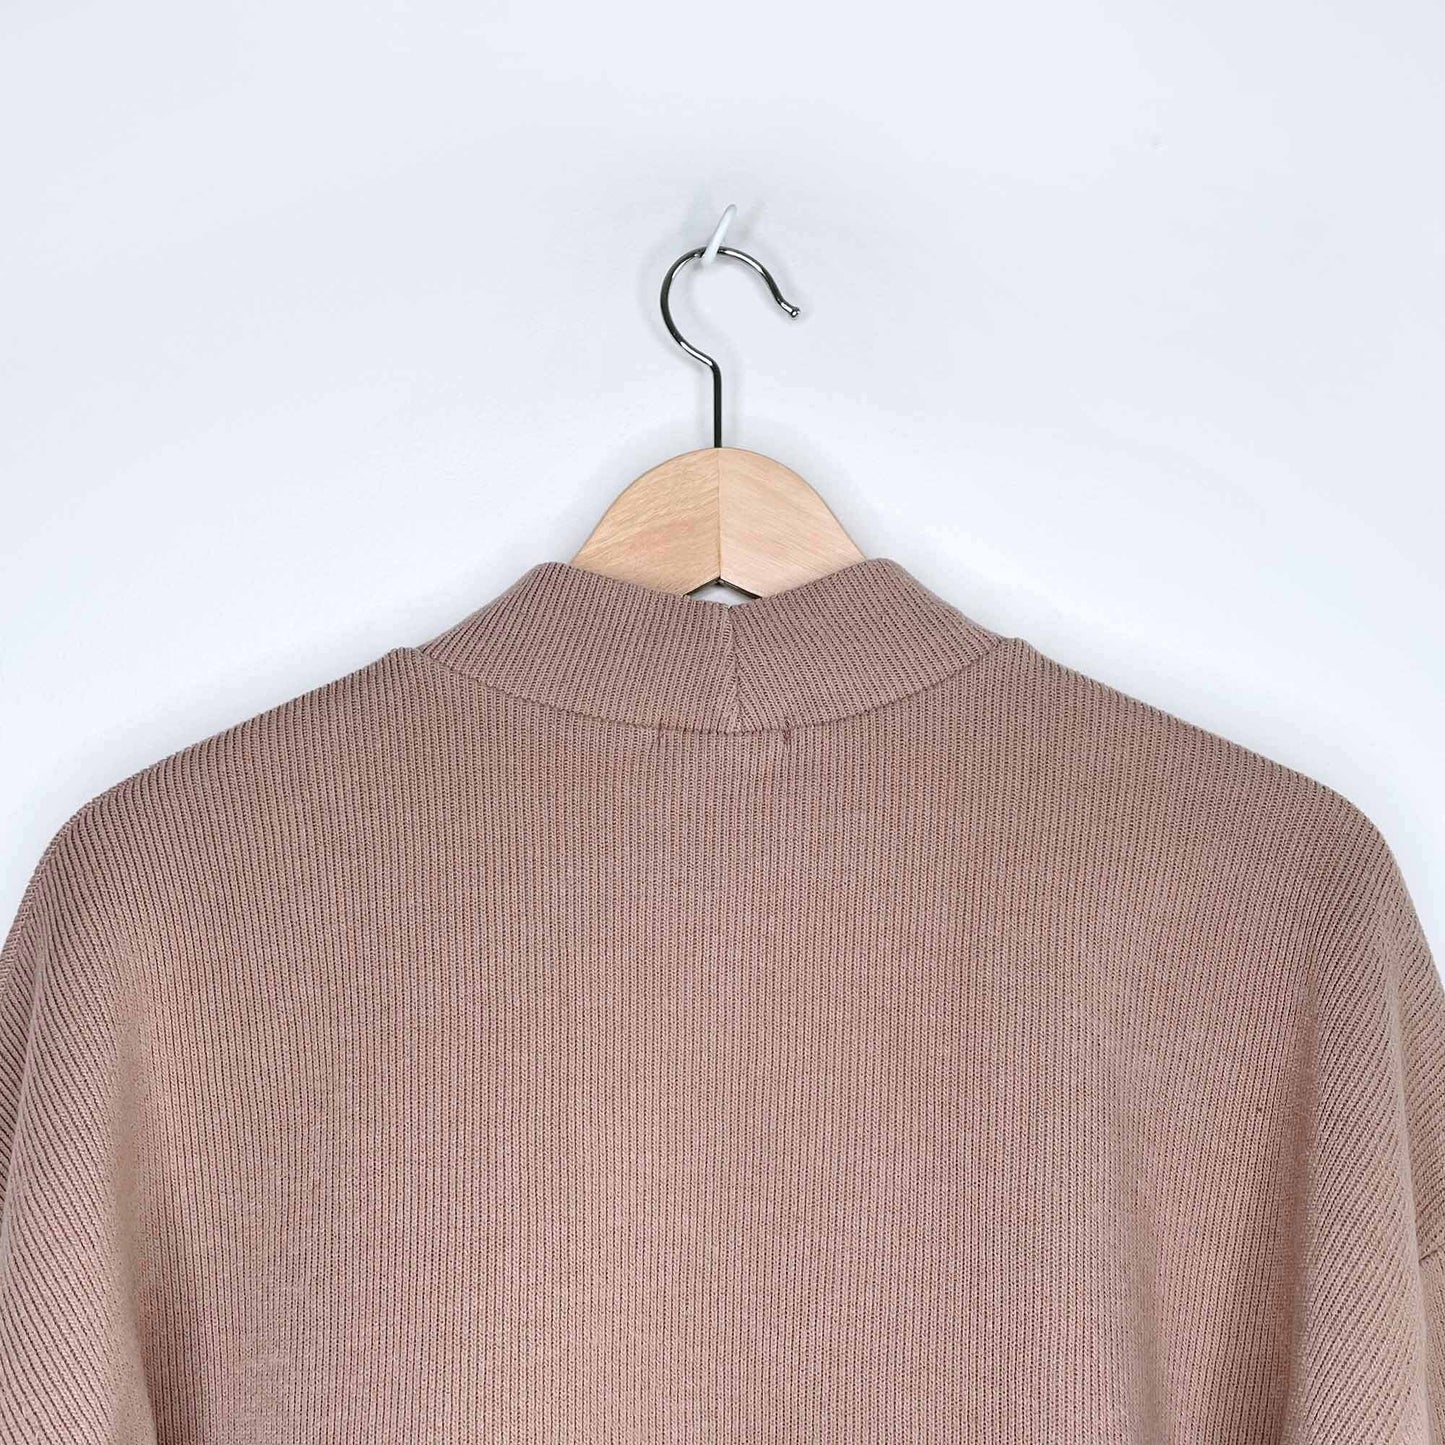 Spring Company Seoul mockneck crop sweater - size Small